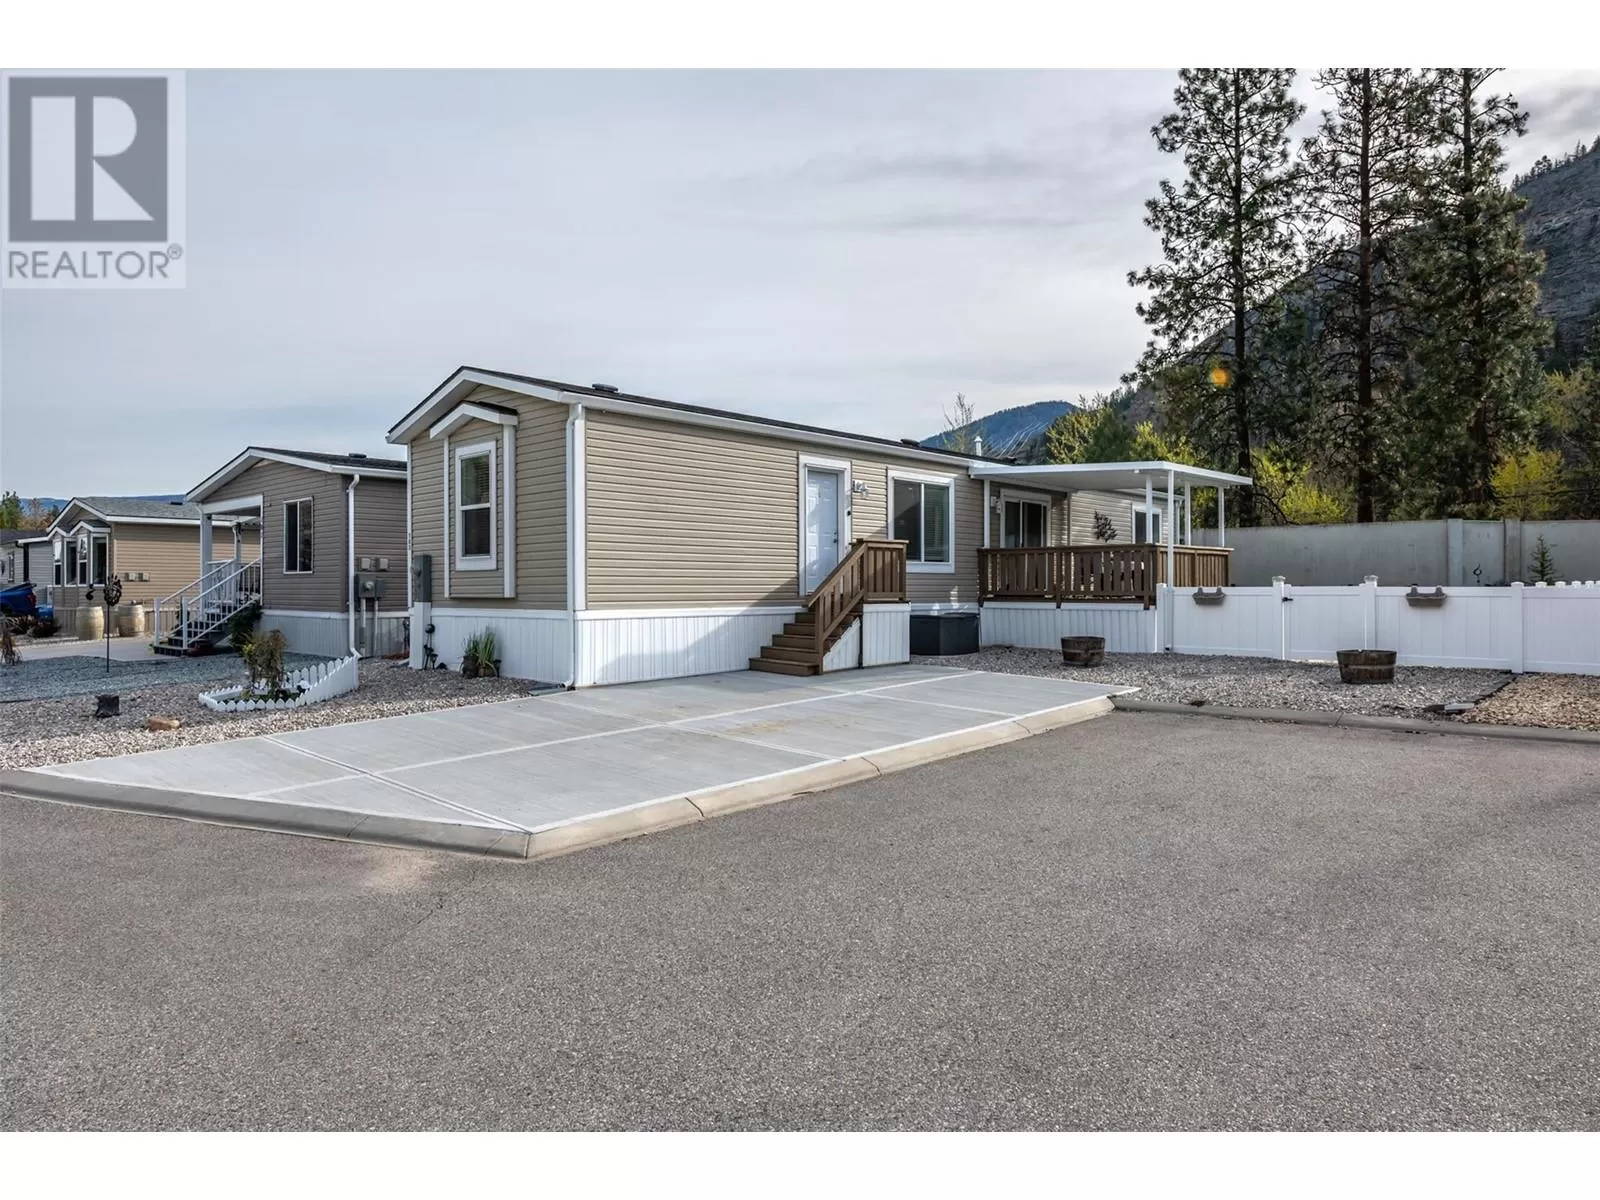 Manufactured Home for rent: 8598 Hwy 97 Unit# 102, Oliver, British Columbia V0H 1T2